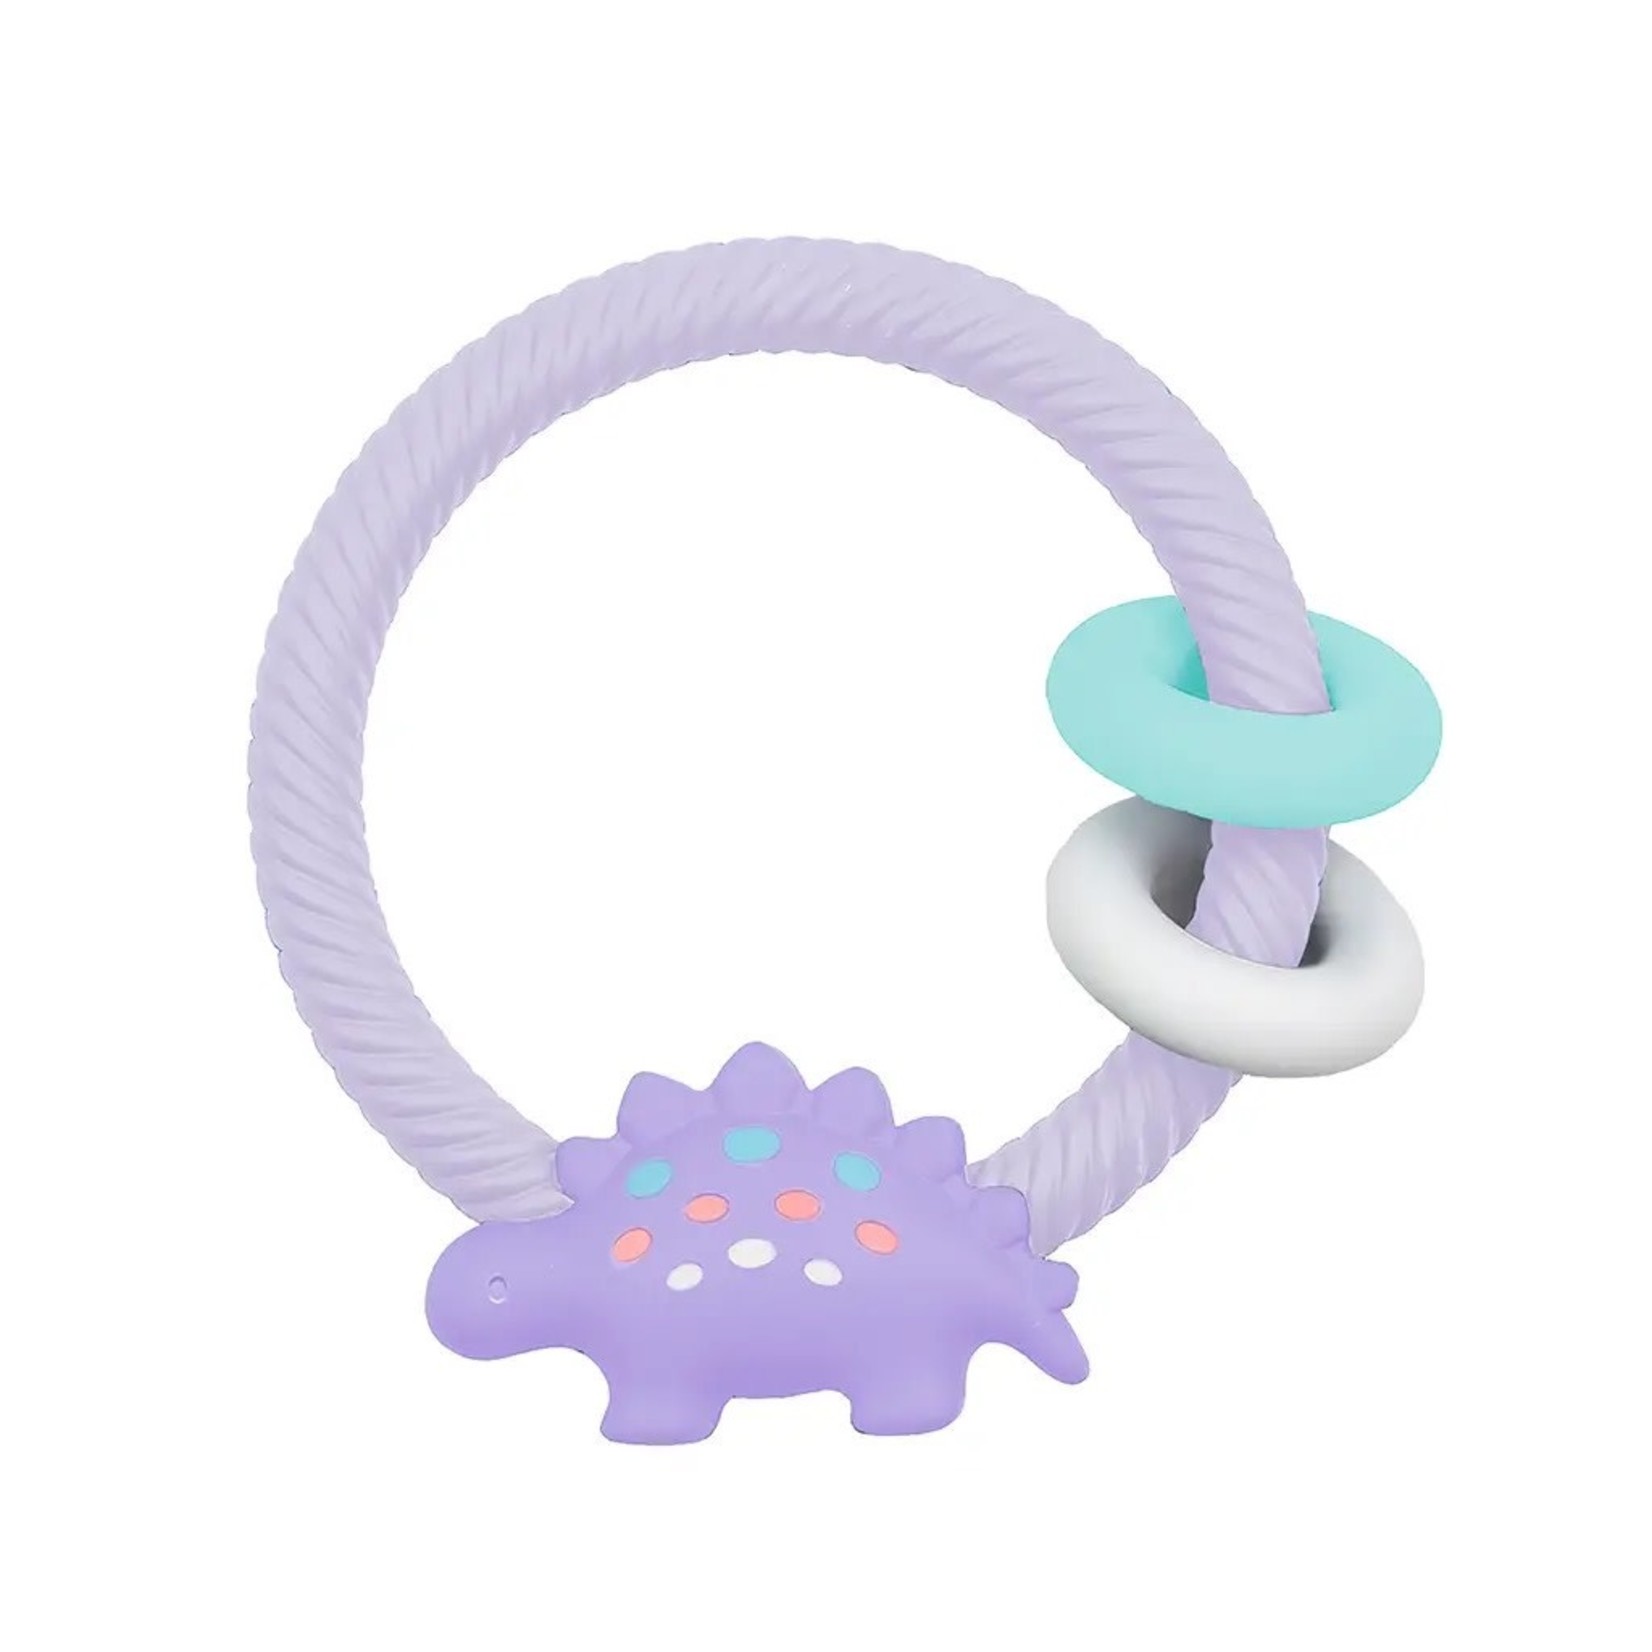 Silicone Teether Rattles